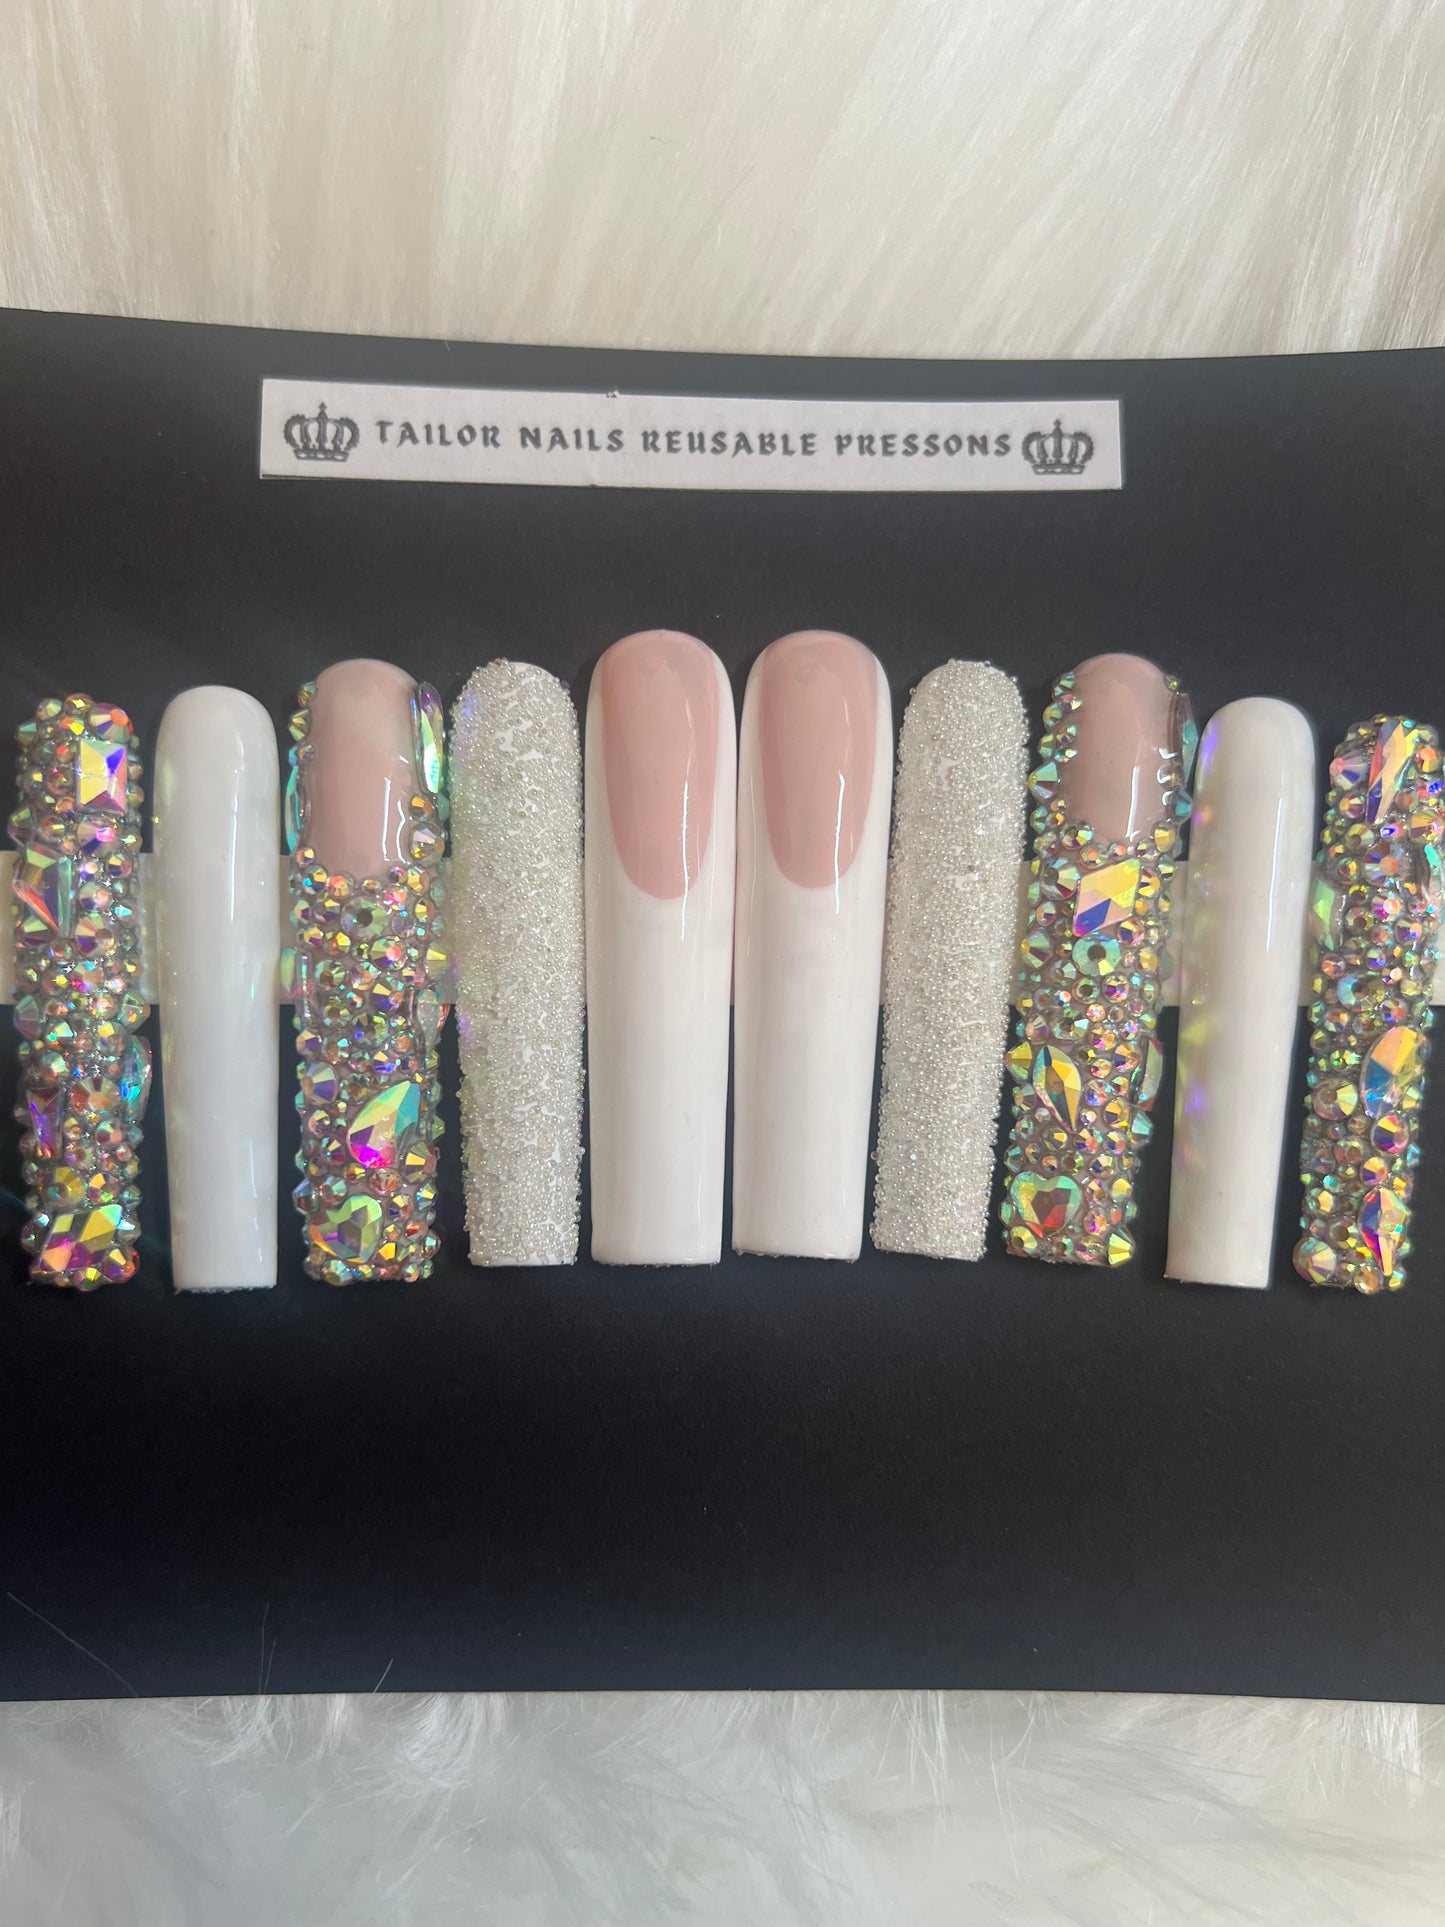 XXL Blinged Out French Tip Nails (size required)